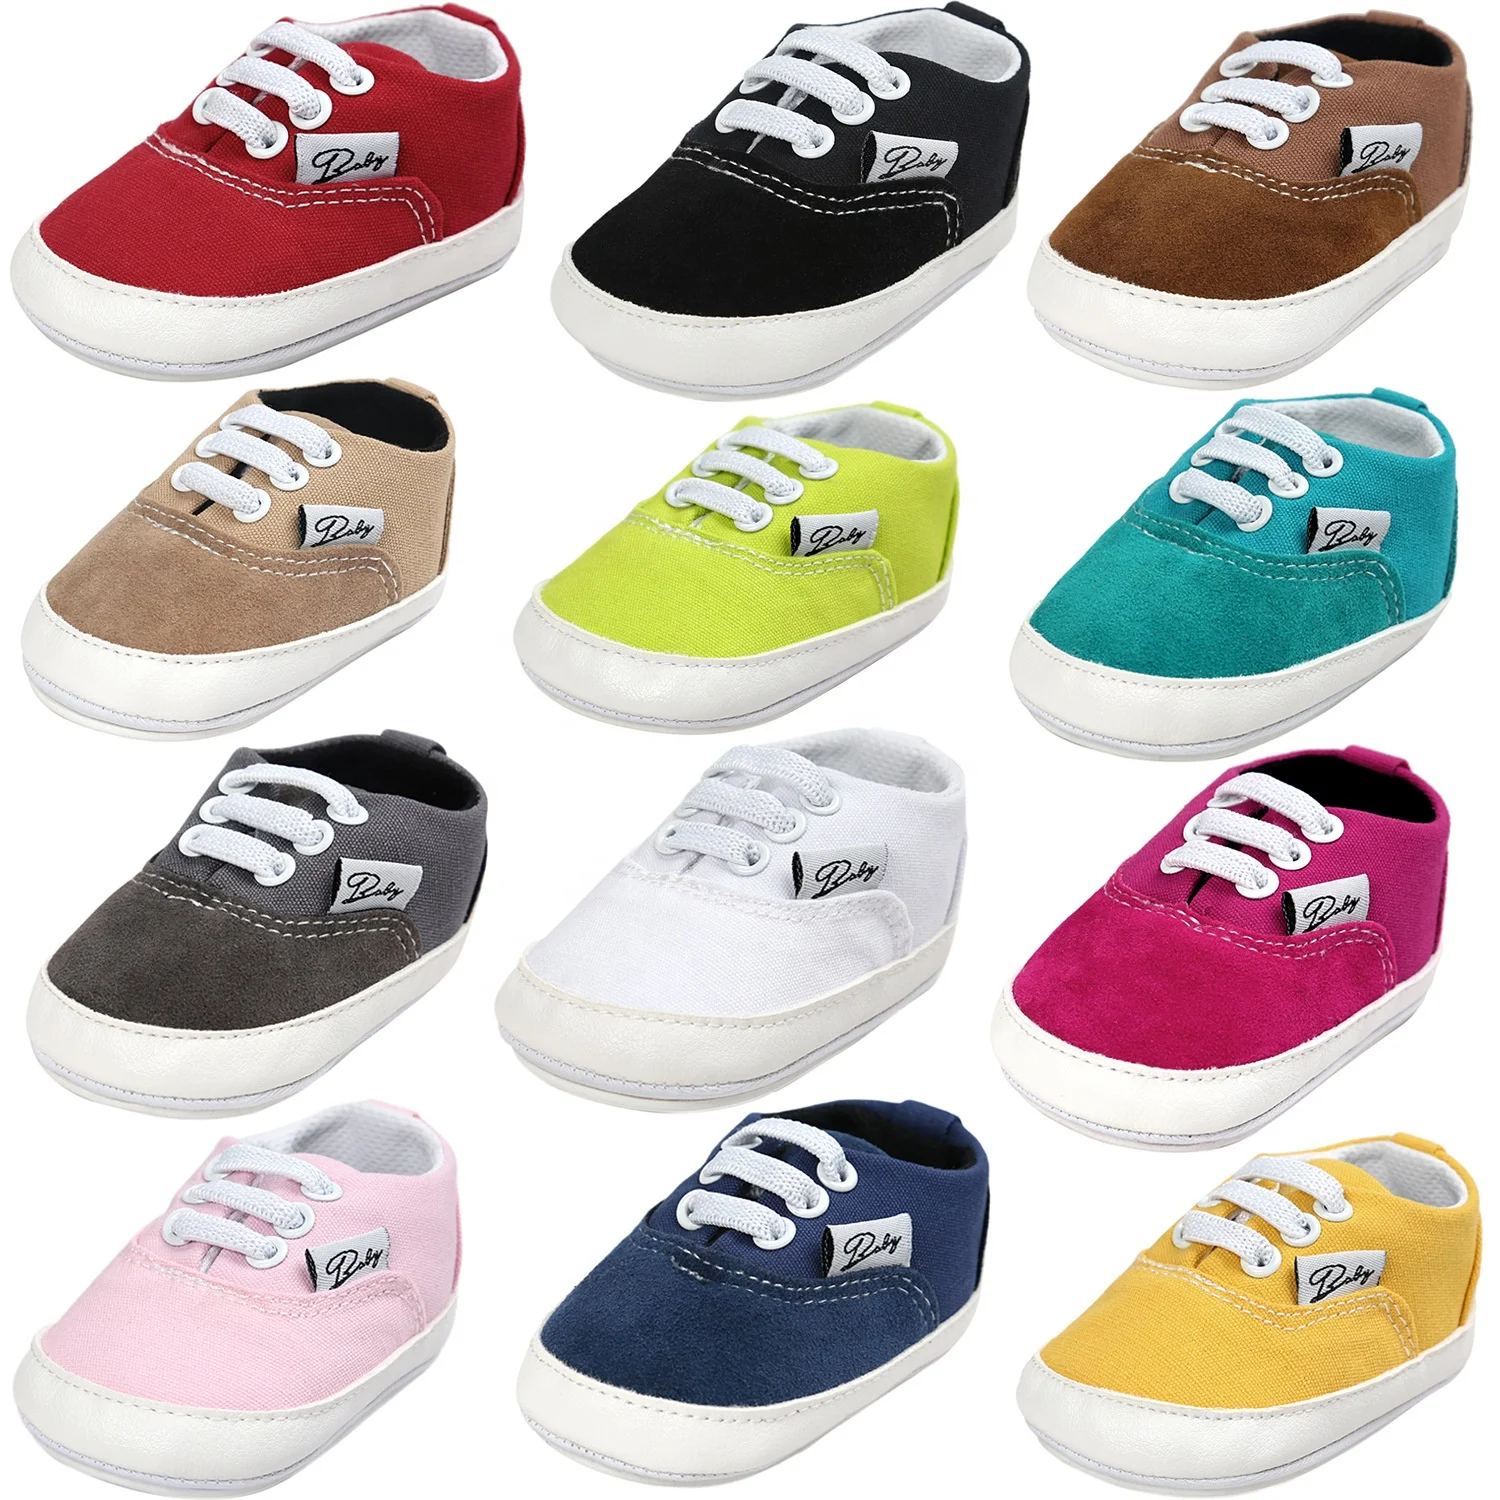 

High Quality Outdoor four Season breathable soft sole organic rubber anti-slip unisex baby sneaker Canvas Shoe